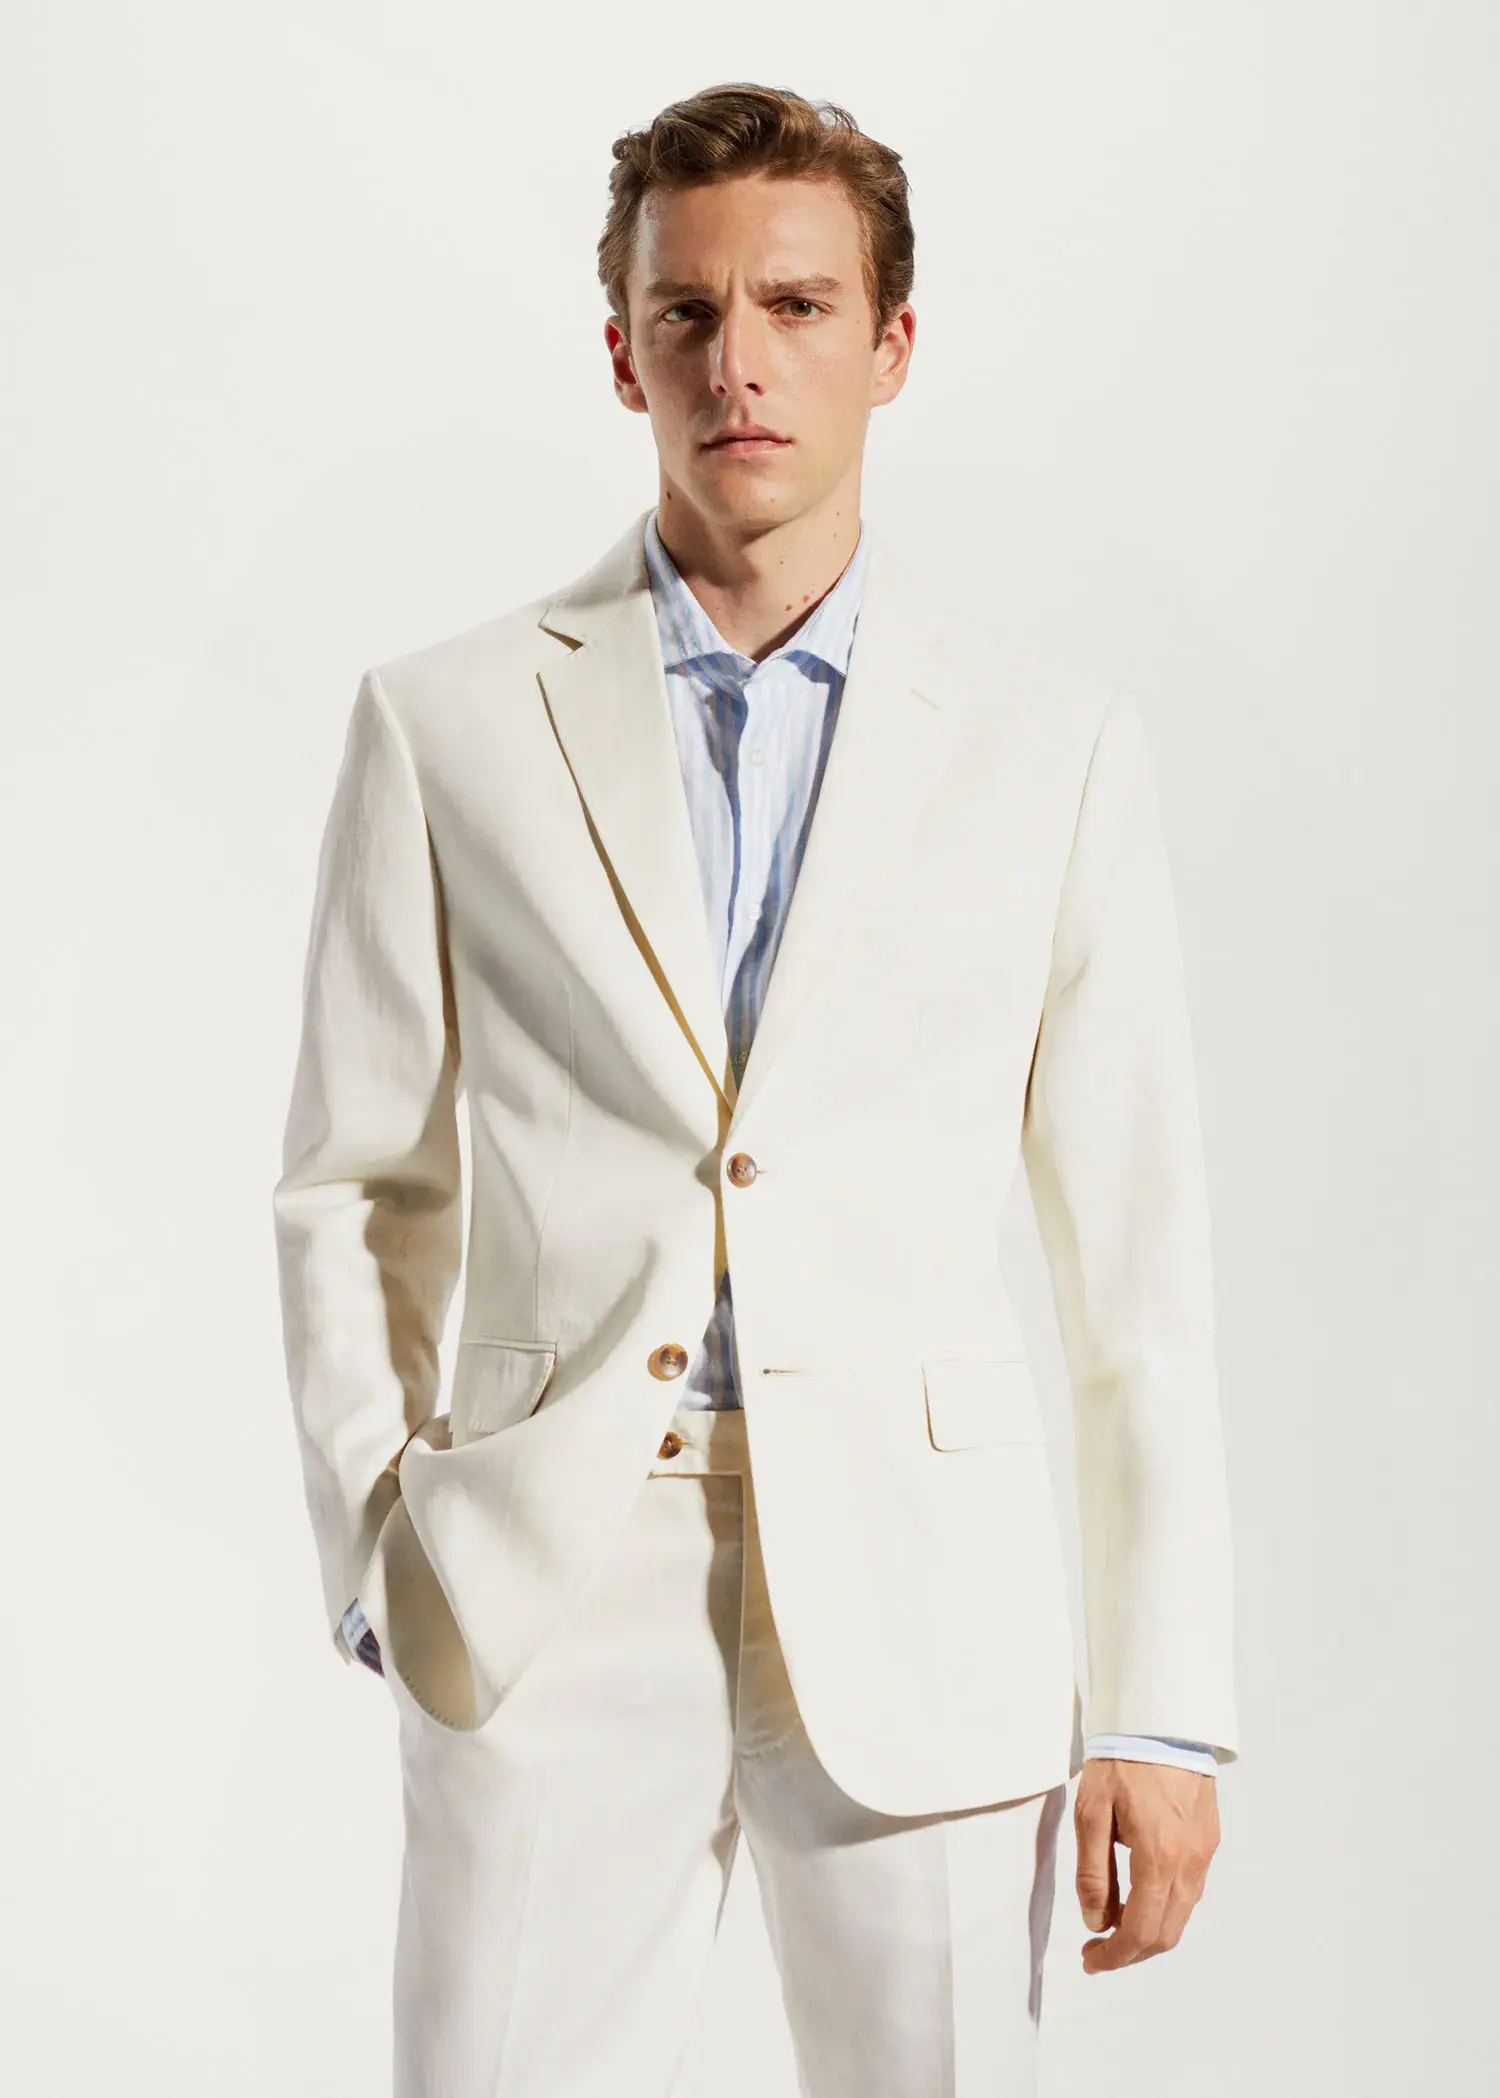 Mango 100% linen suit blazer. a man in a white suit standing in front of a white wall. 